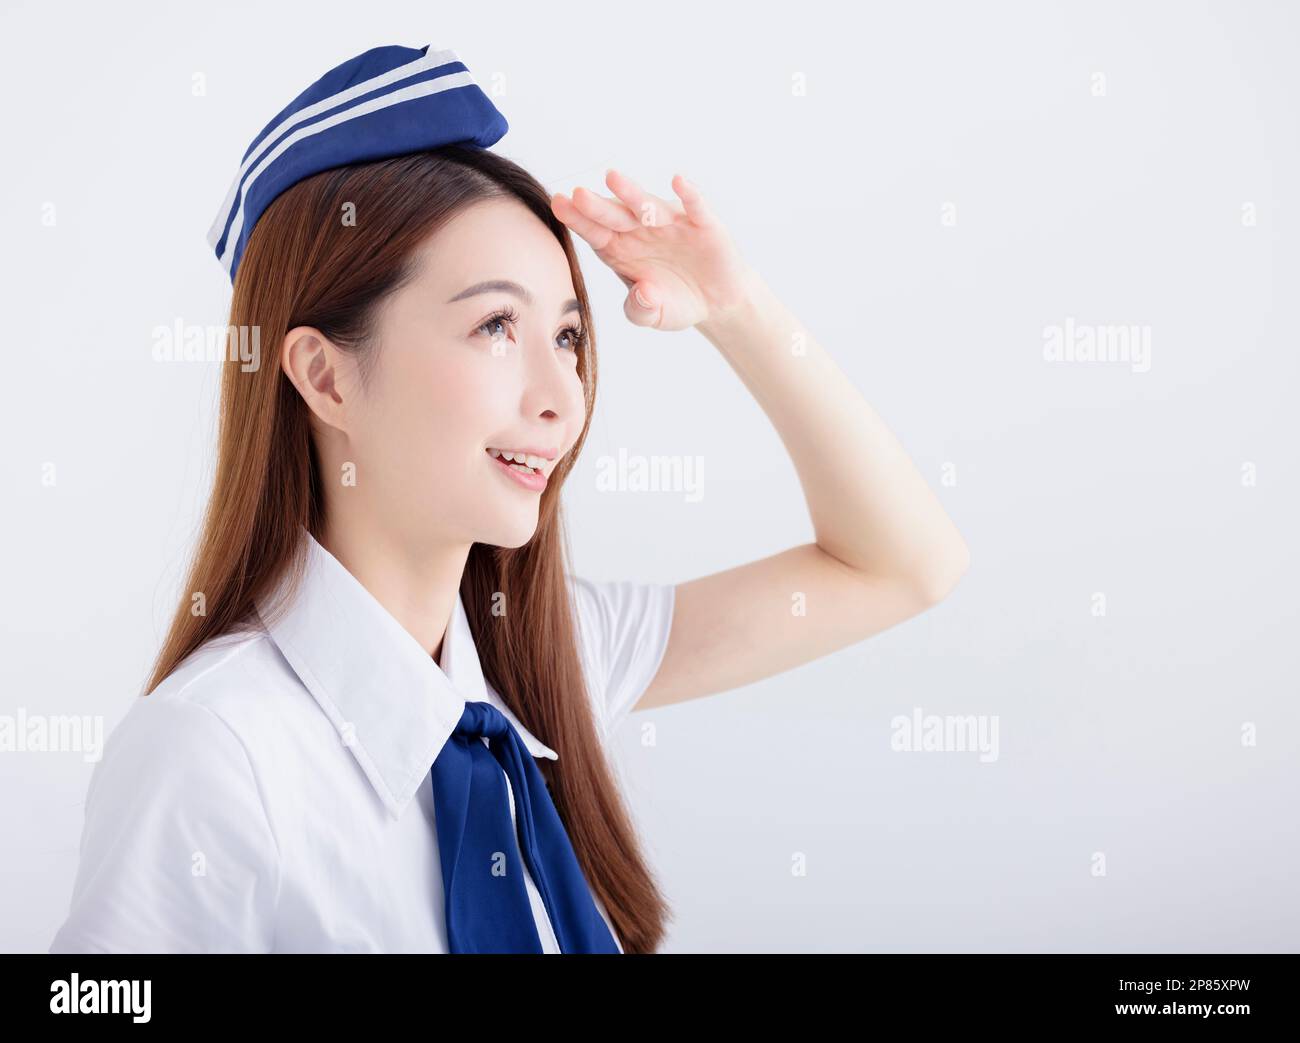 Airplane stewardess young woman looking far away isolated on white Stock Photo